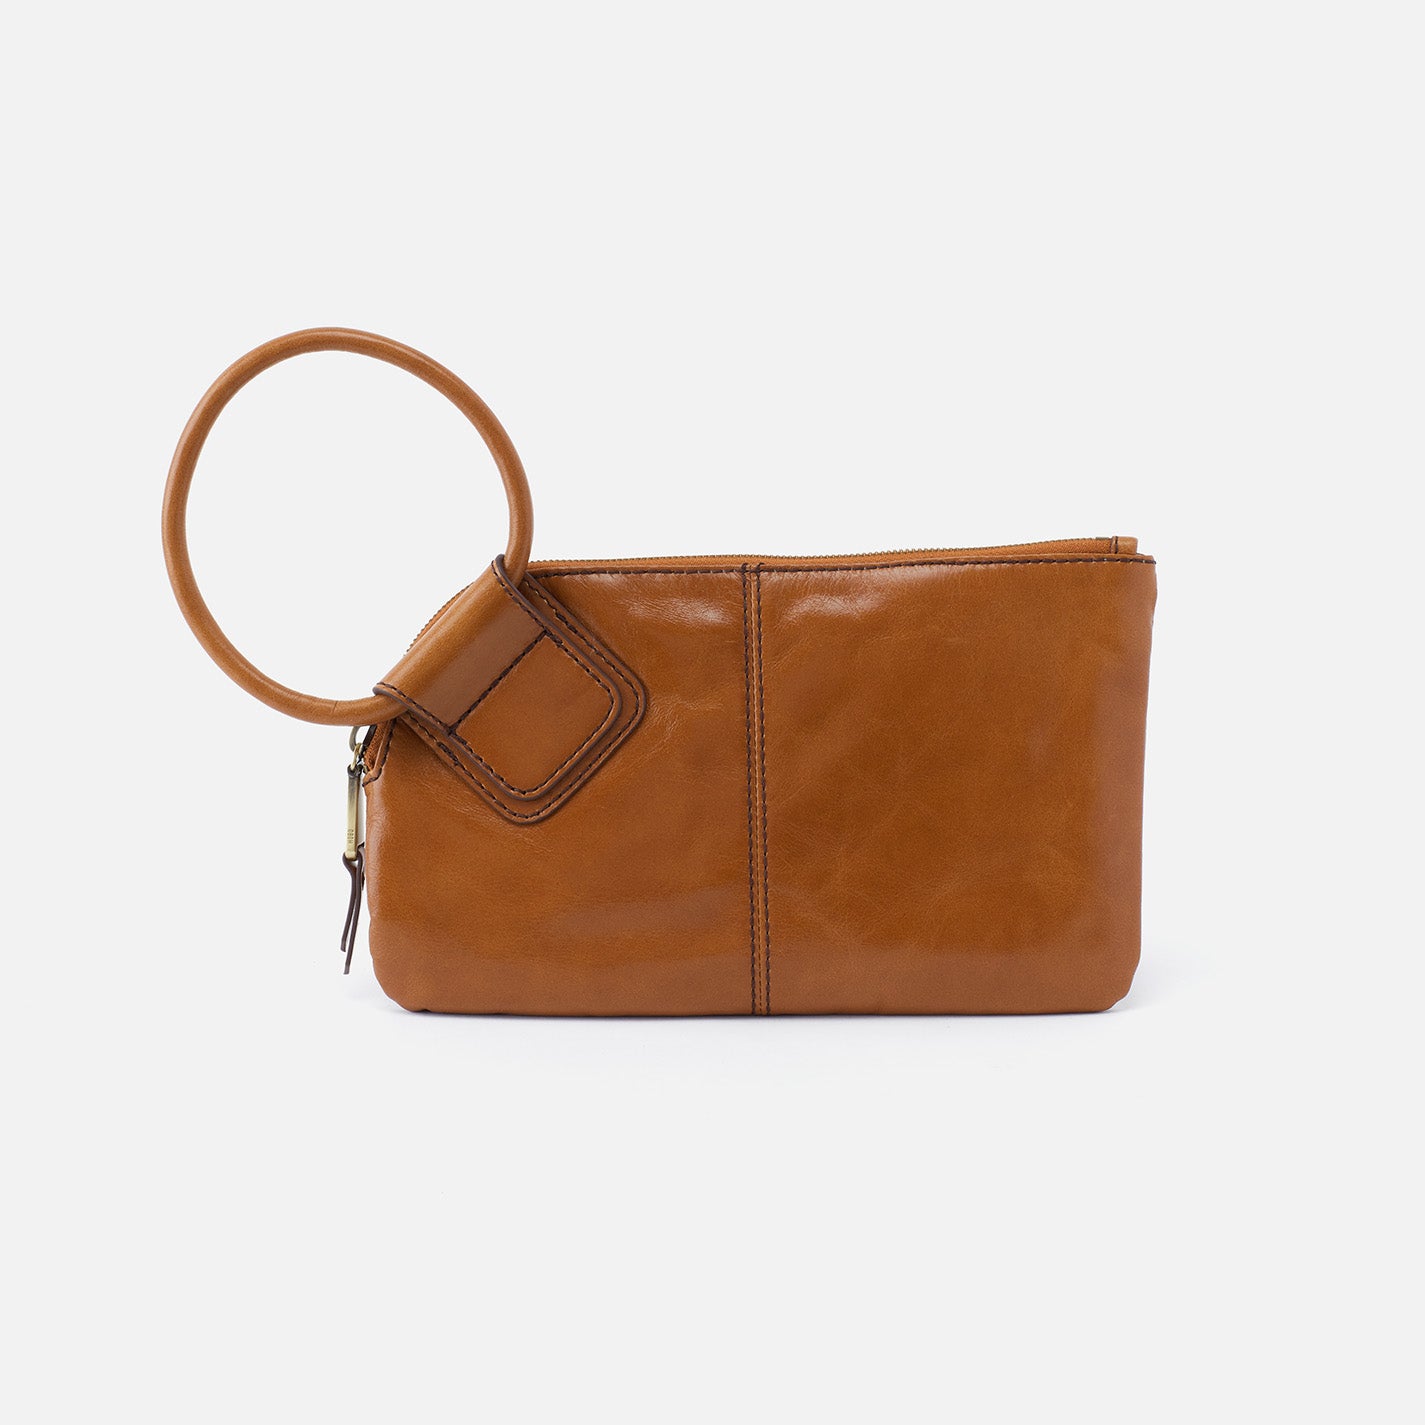 Sable Wristlet in Polished Leather - Truffle – HOBO